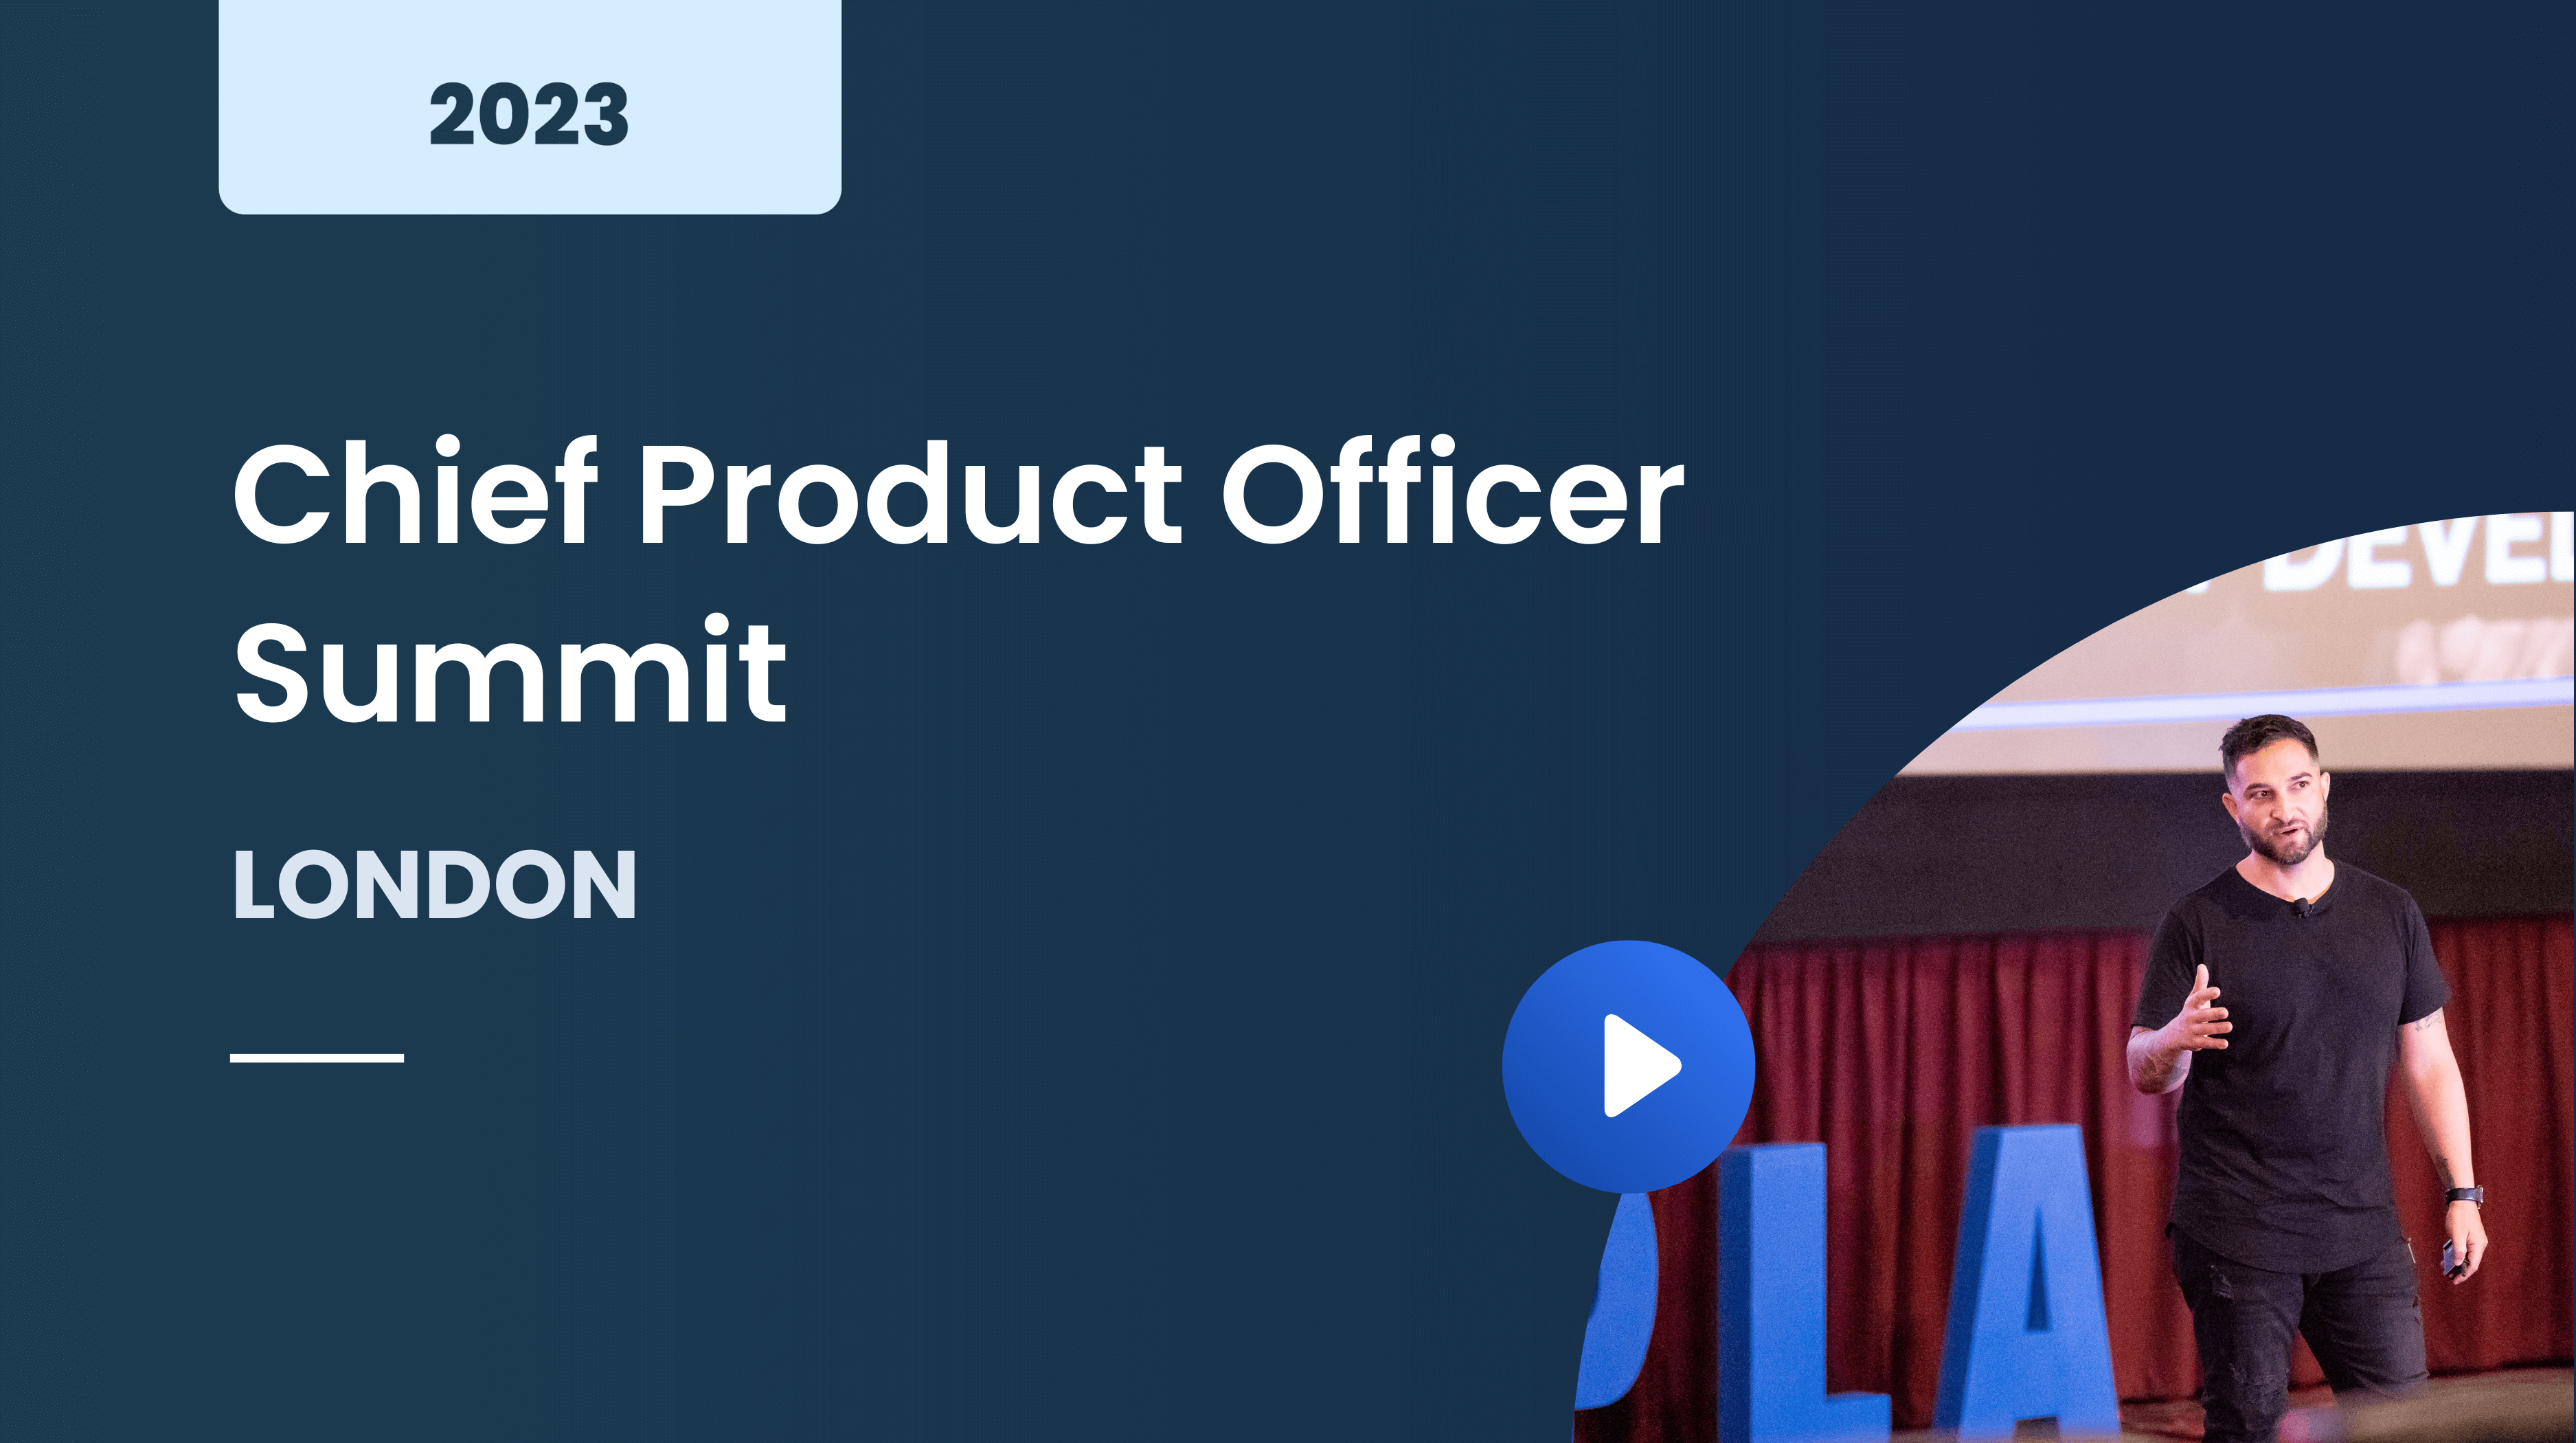 Chief Product Officer Summit London 2023